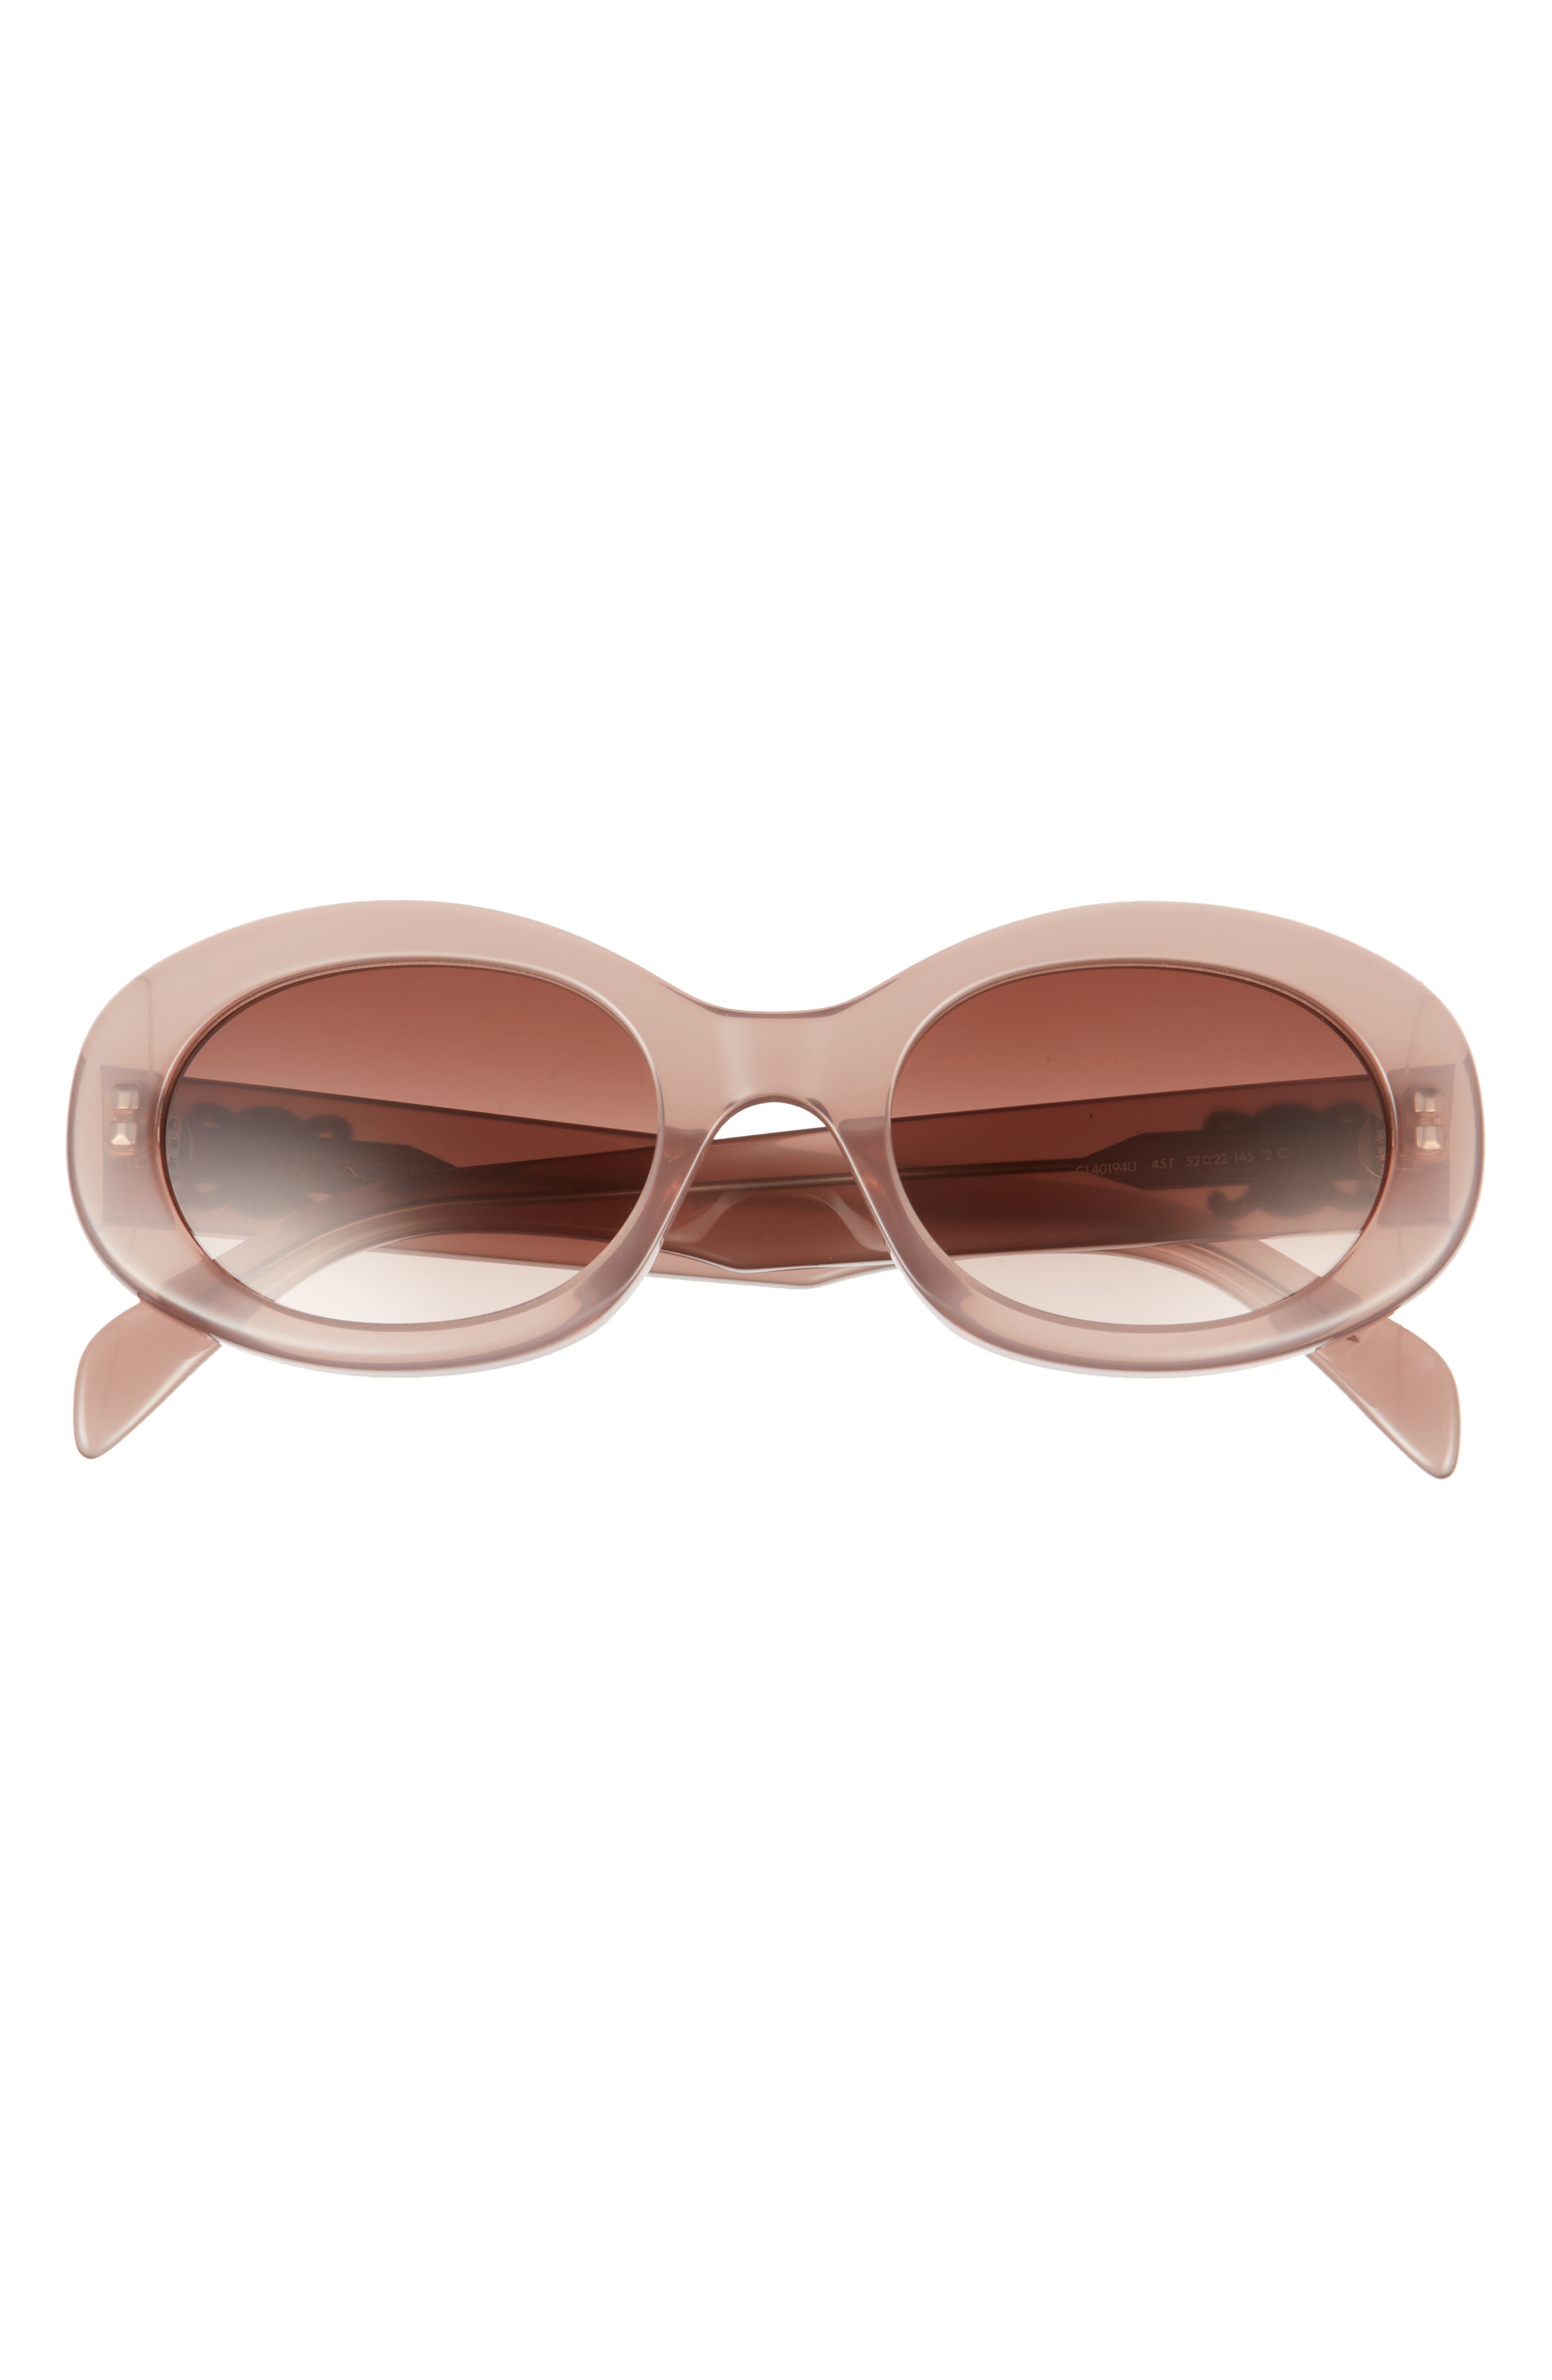 CELINE Triomphe 52mm Gradient Oval Sunglasses in Shiny Light Brown /Brown